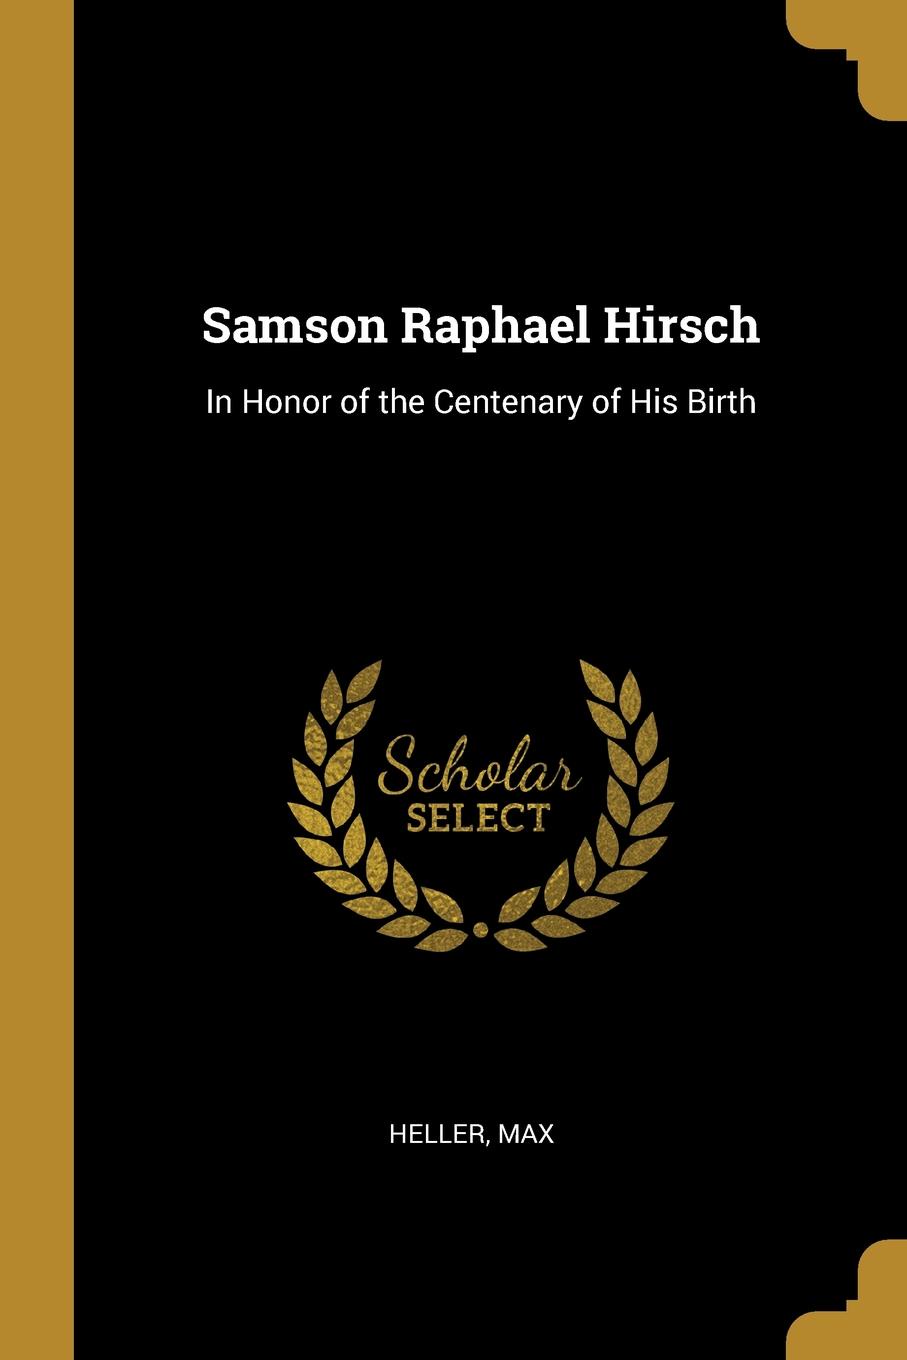 Samson Raphael Hirsch. In Honor of the Centenary of His Birth